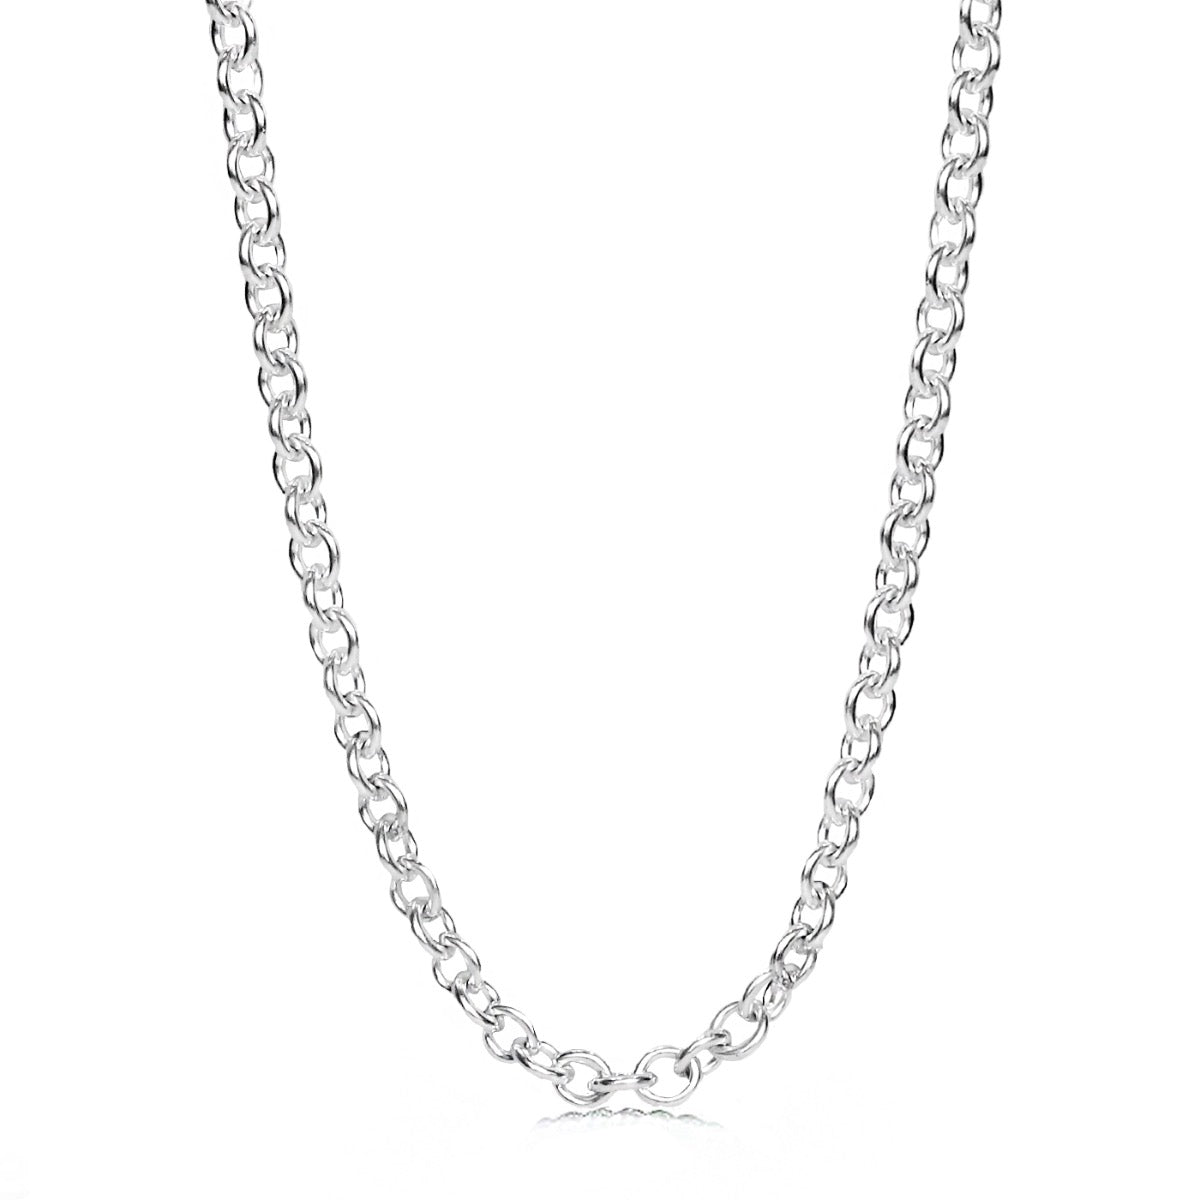 Chunky Sterling Silver Cable Chain Necklace | Hersey & Son Silversmiths